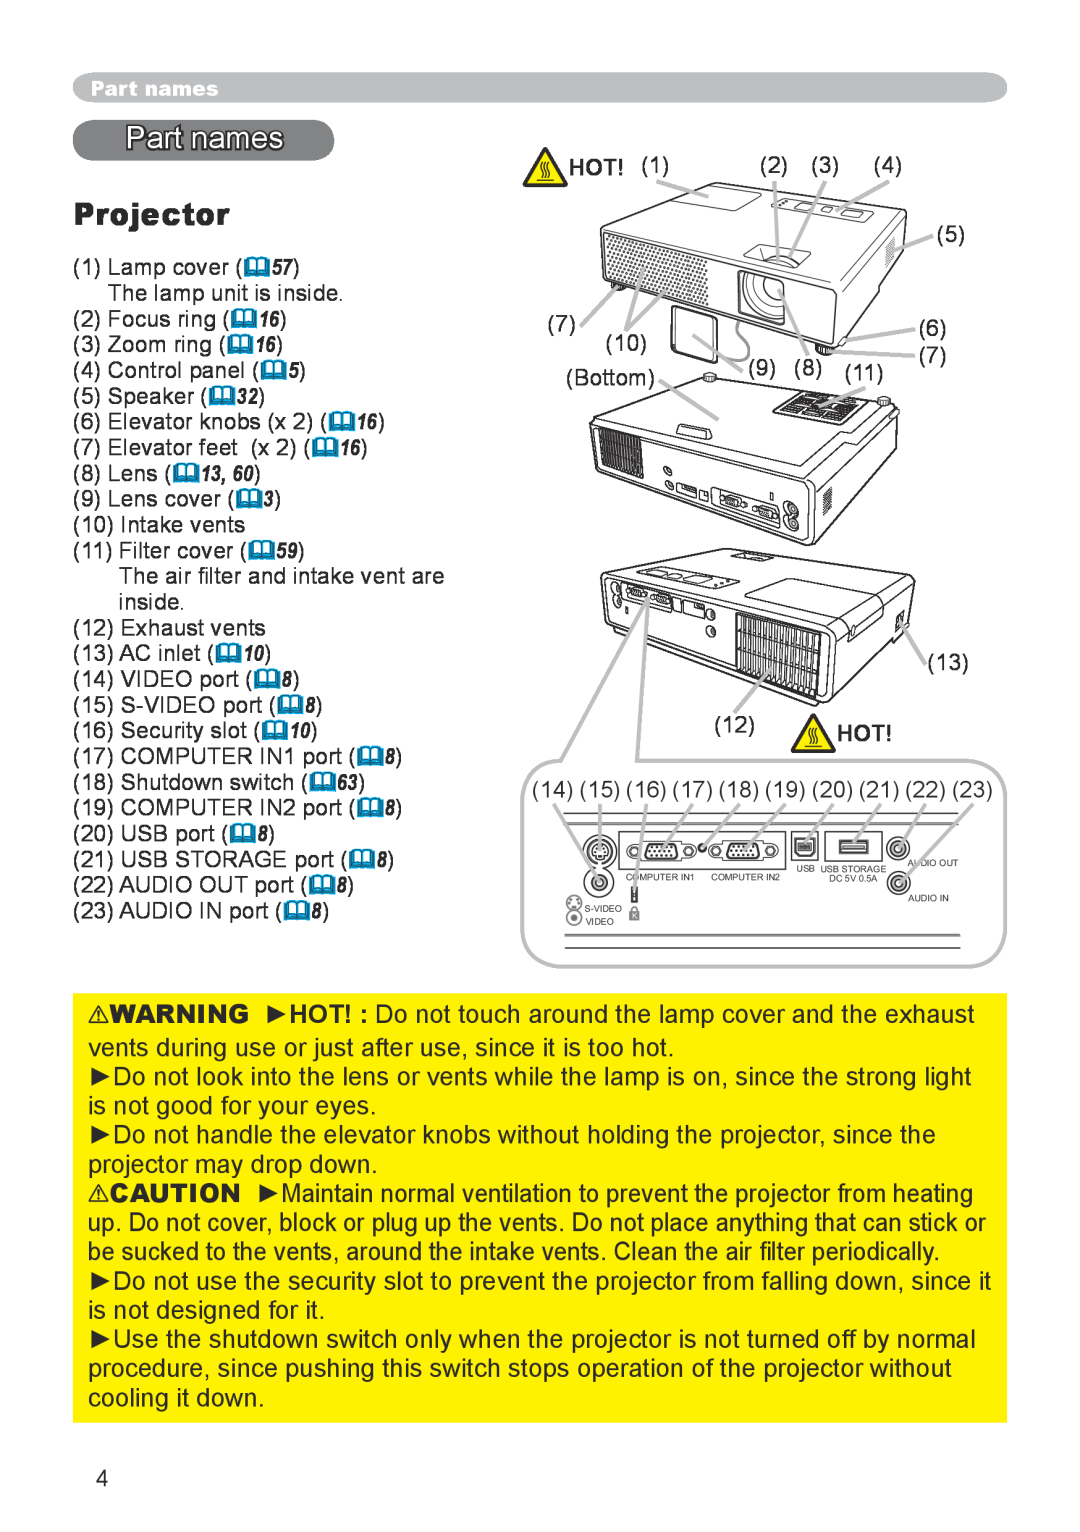 Apple CPX5, CPX1 user manual Part names, Projector 